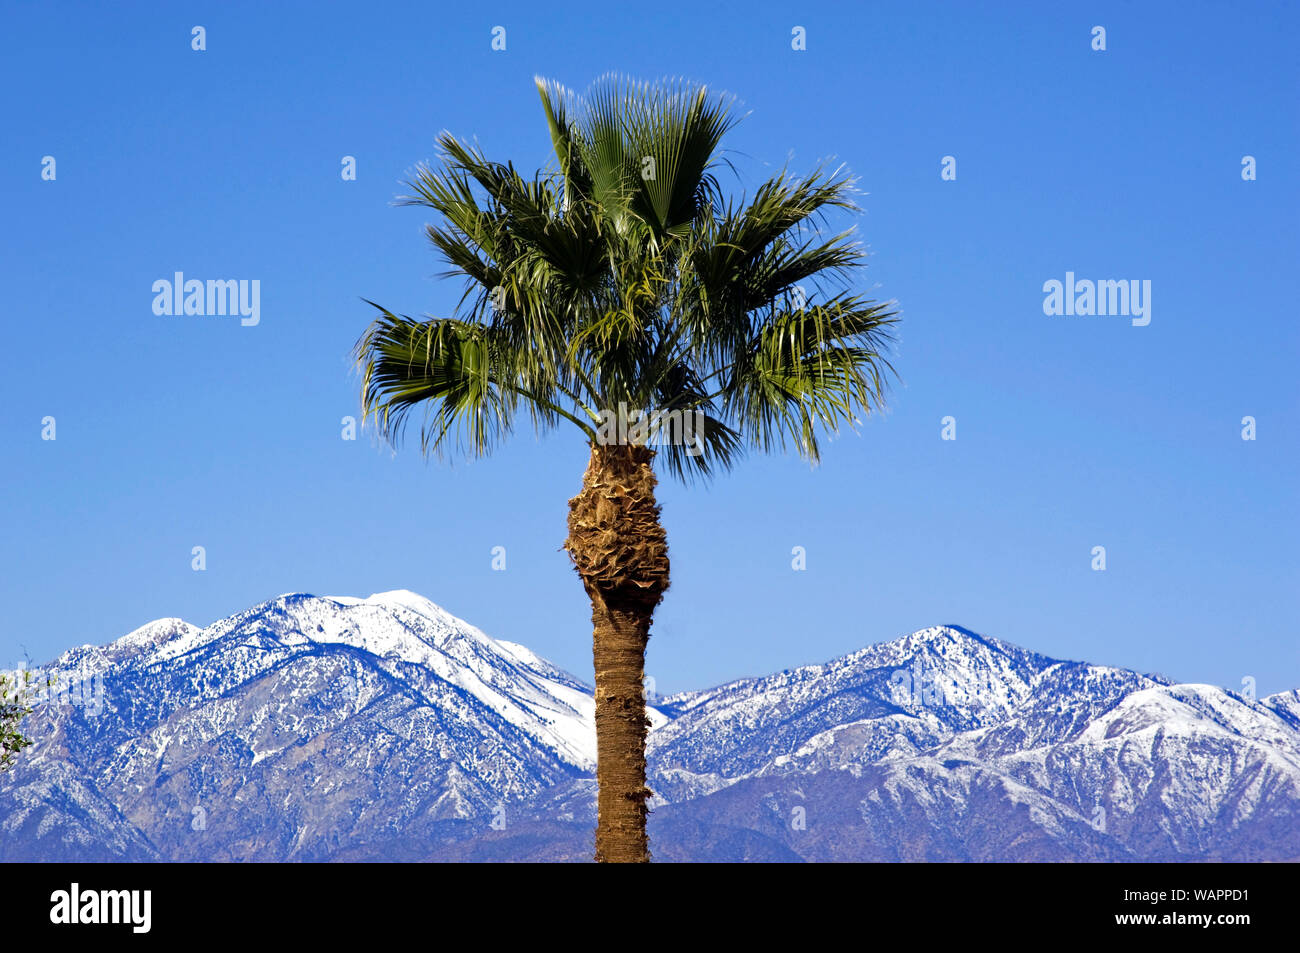 Palm tree and mountains with snow near Palm Springs, CA Stock Photo